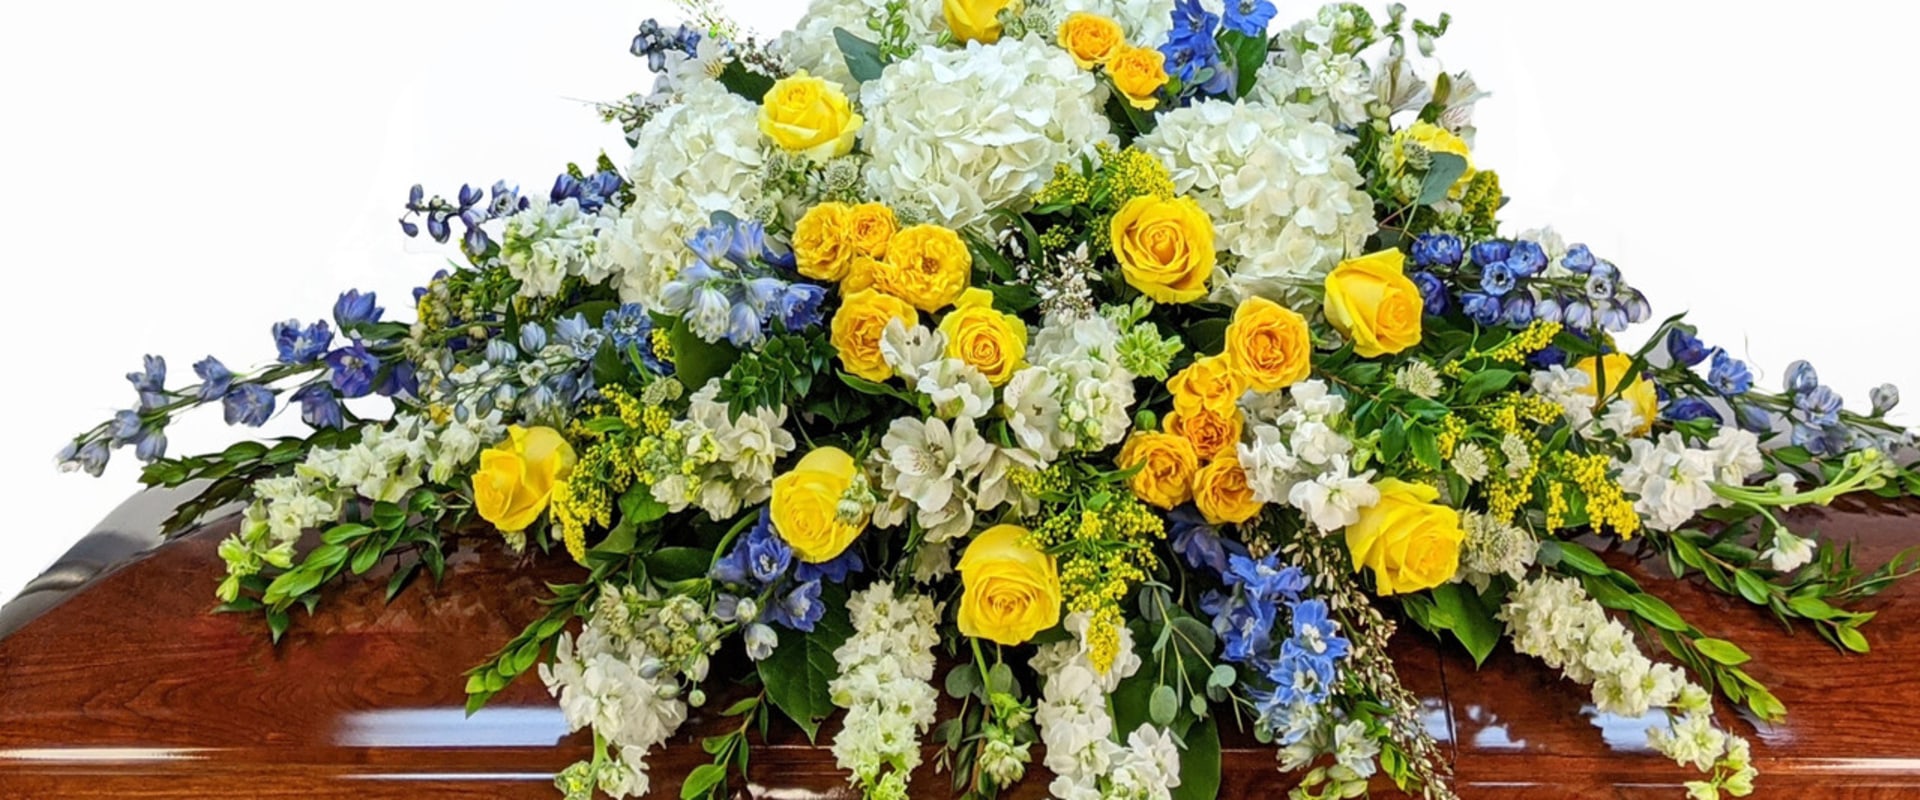 Special Offers and Discounts for Returning Customers at Oklahoma City Florists